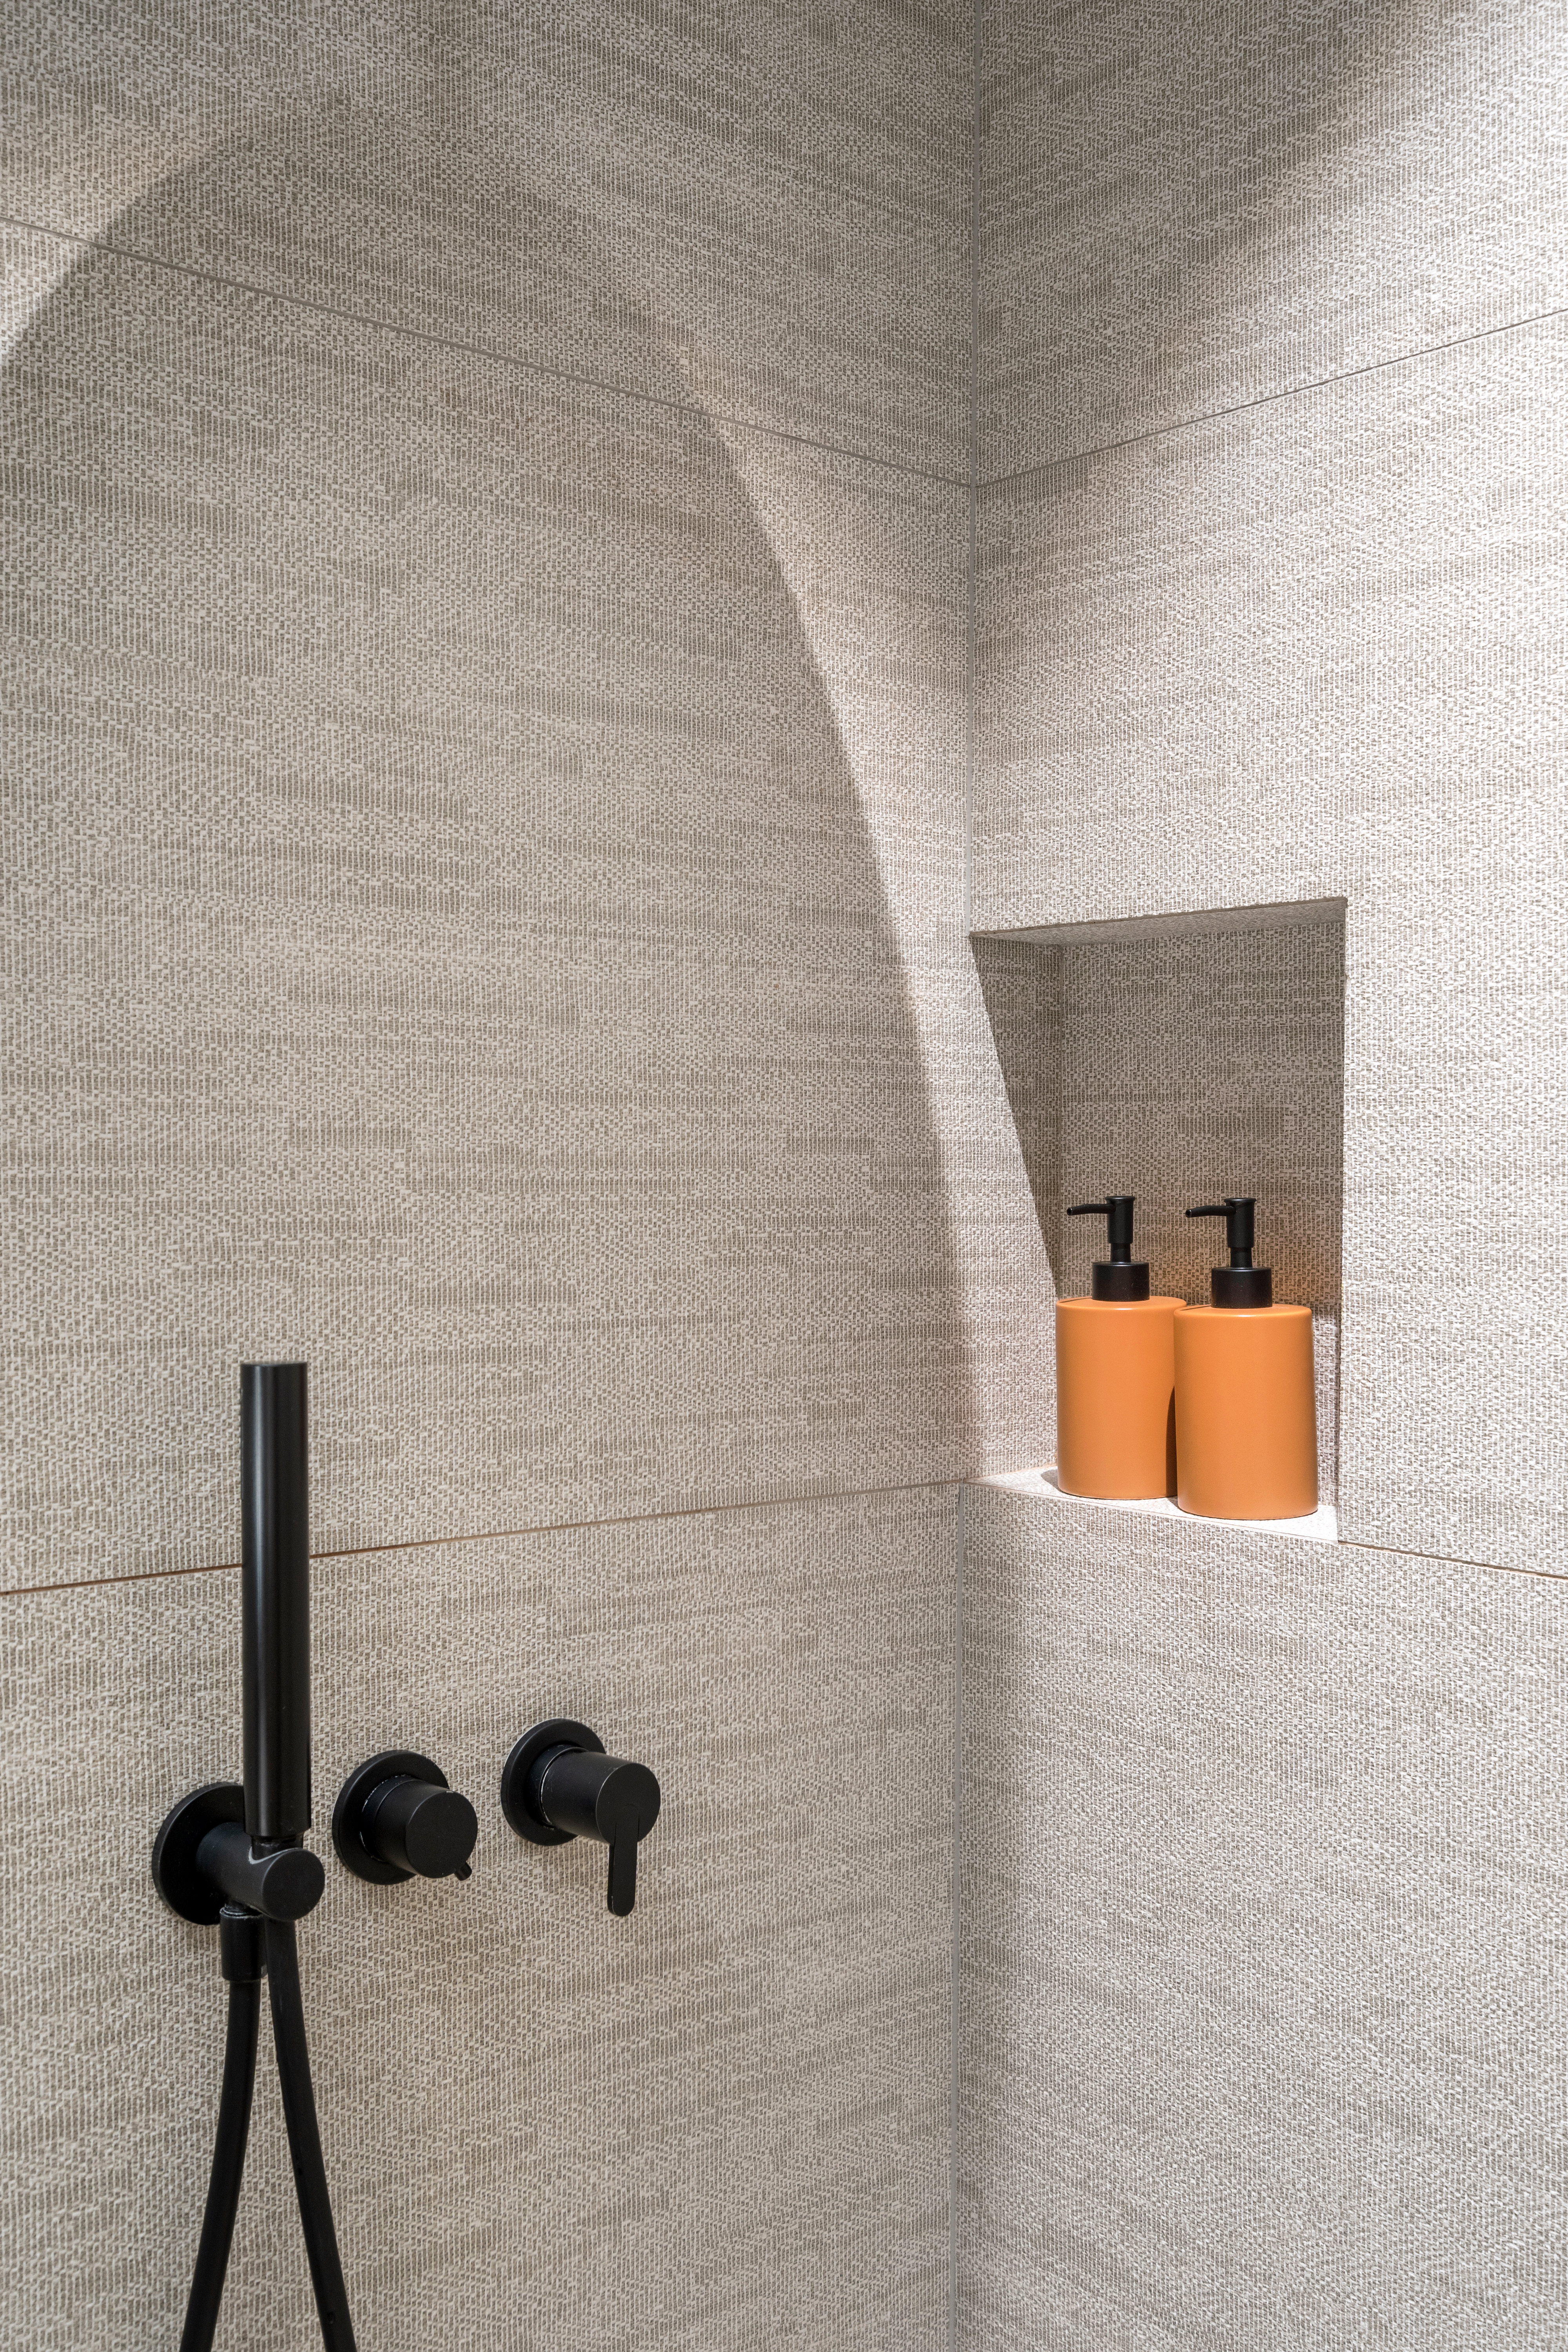 A modern shower corner with a minimalist black faucet and niche for toiletries